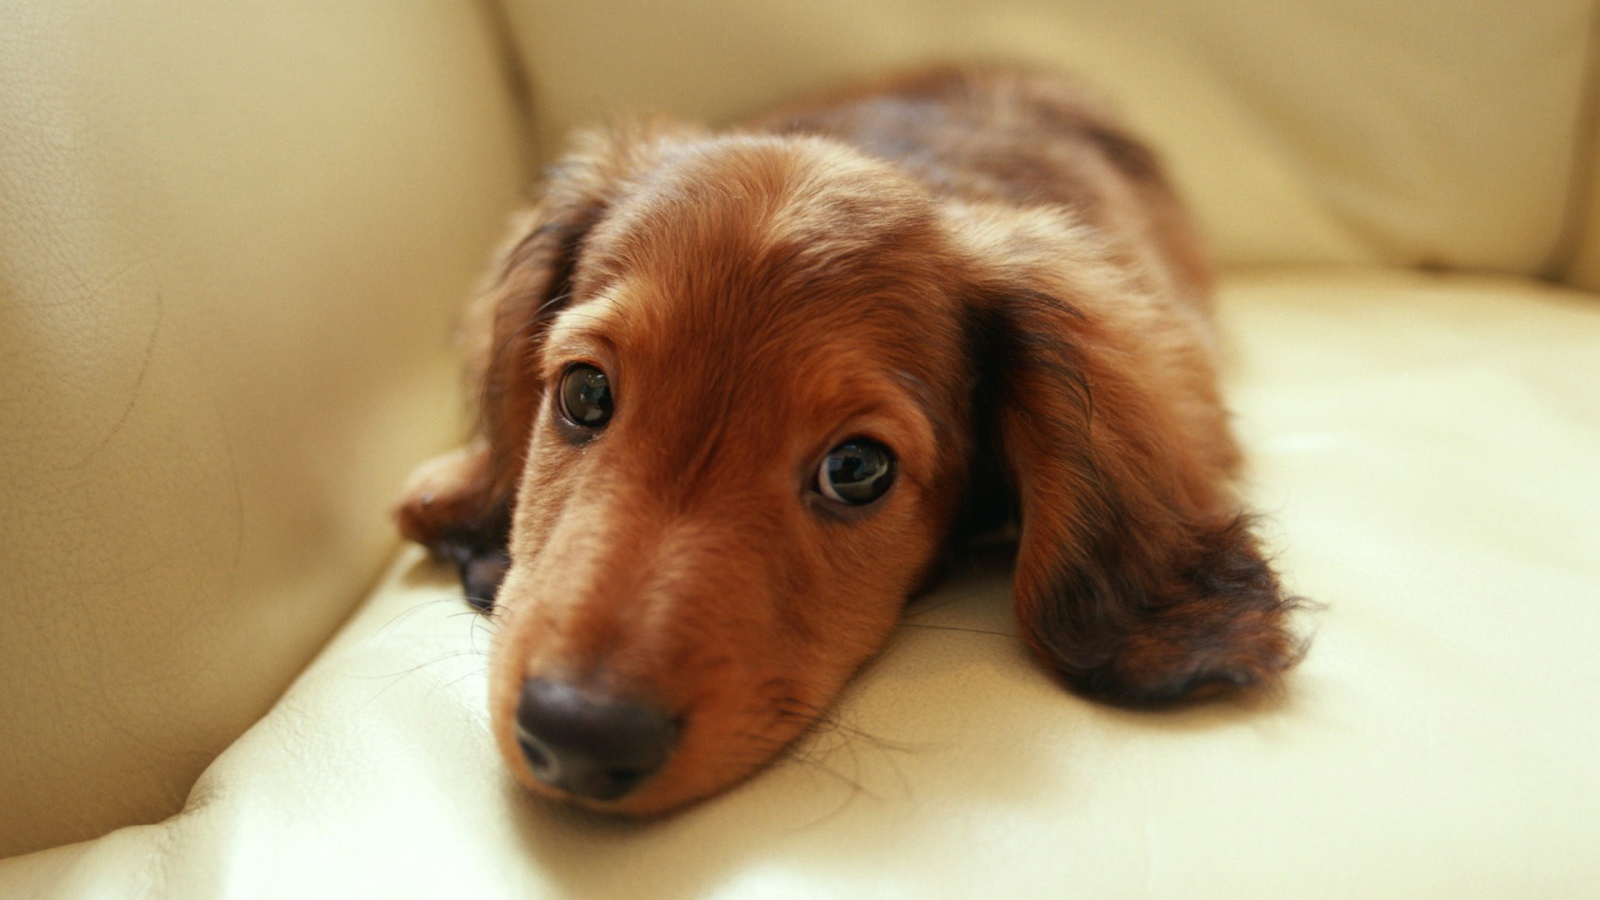 Sad dachshund lying on the couch